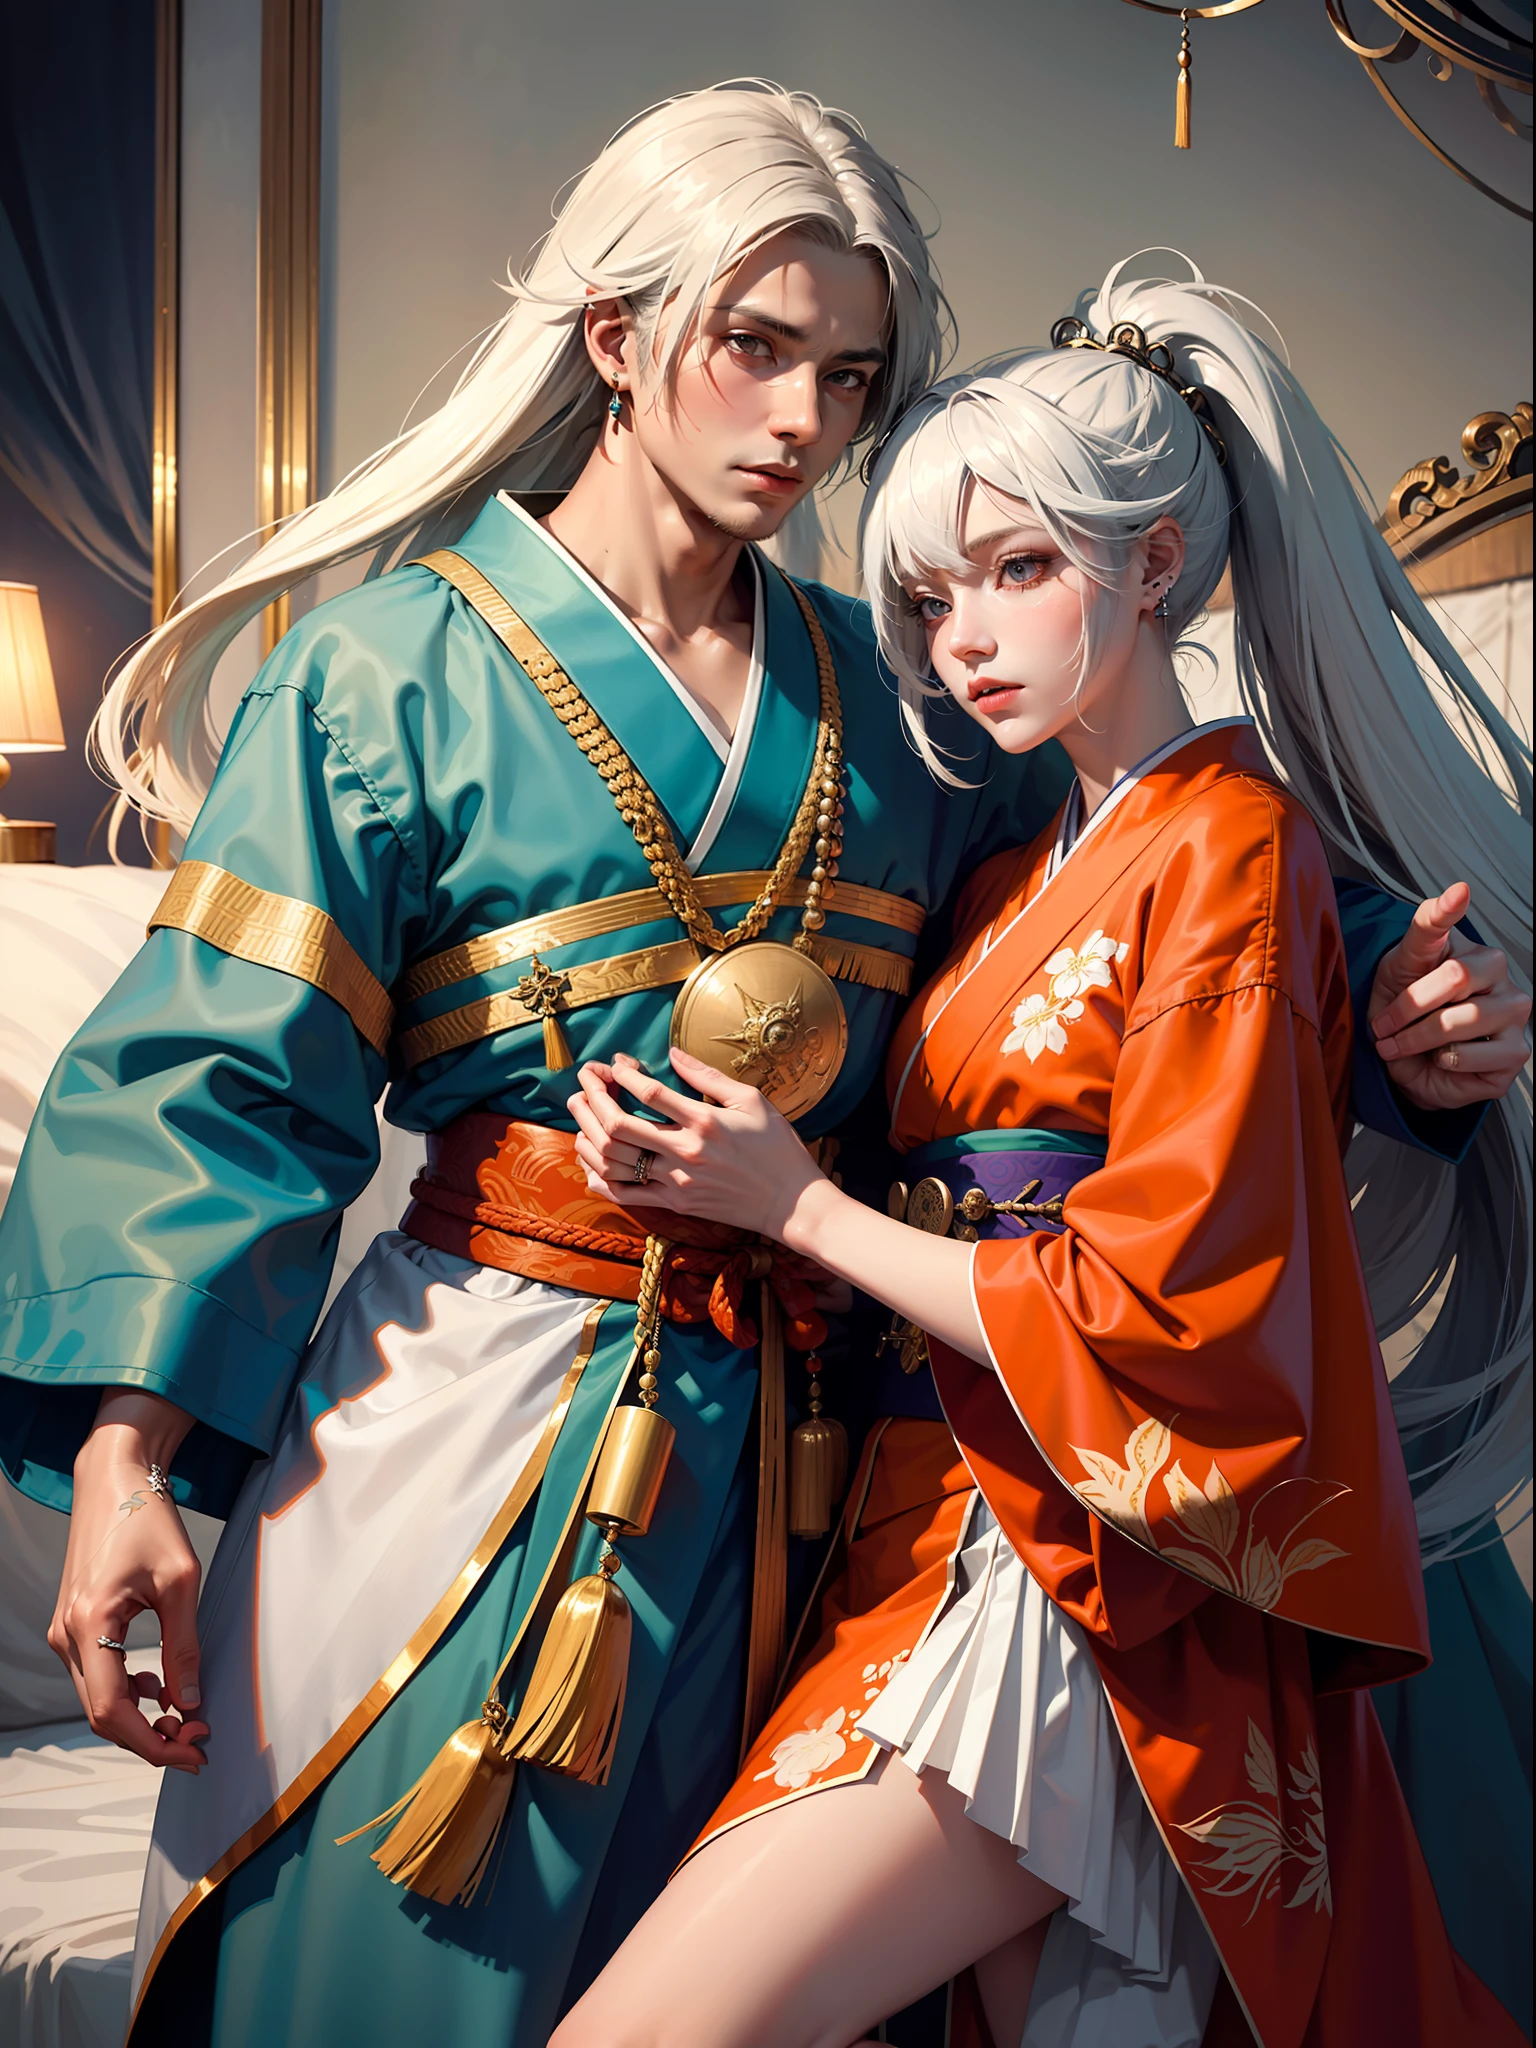 Concept Art, "1 Couple, Male Focus, Fin Ears, Multicolored Hair, Handsome Boy, Long White Hair, Tassels, Bangs, Carp, Colorful, Bold Colors, White Kimono, (Open) Kimono, Traditional Chinese Clothing, Close-up, Intimate Interaction in Bed, Stud Earrings, Rings, Sweat, Illuminate People", Colorful, Master Composition, Focus on Key Figures, Realism, Masterpiece, Award-Standing, Best Quality, Masterpiece, Ultra Detailed, 8K, Extremely Detailed CG Unity 8k wallpaper, complex, highly detailedrealistic